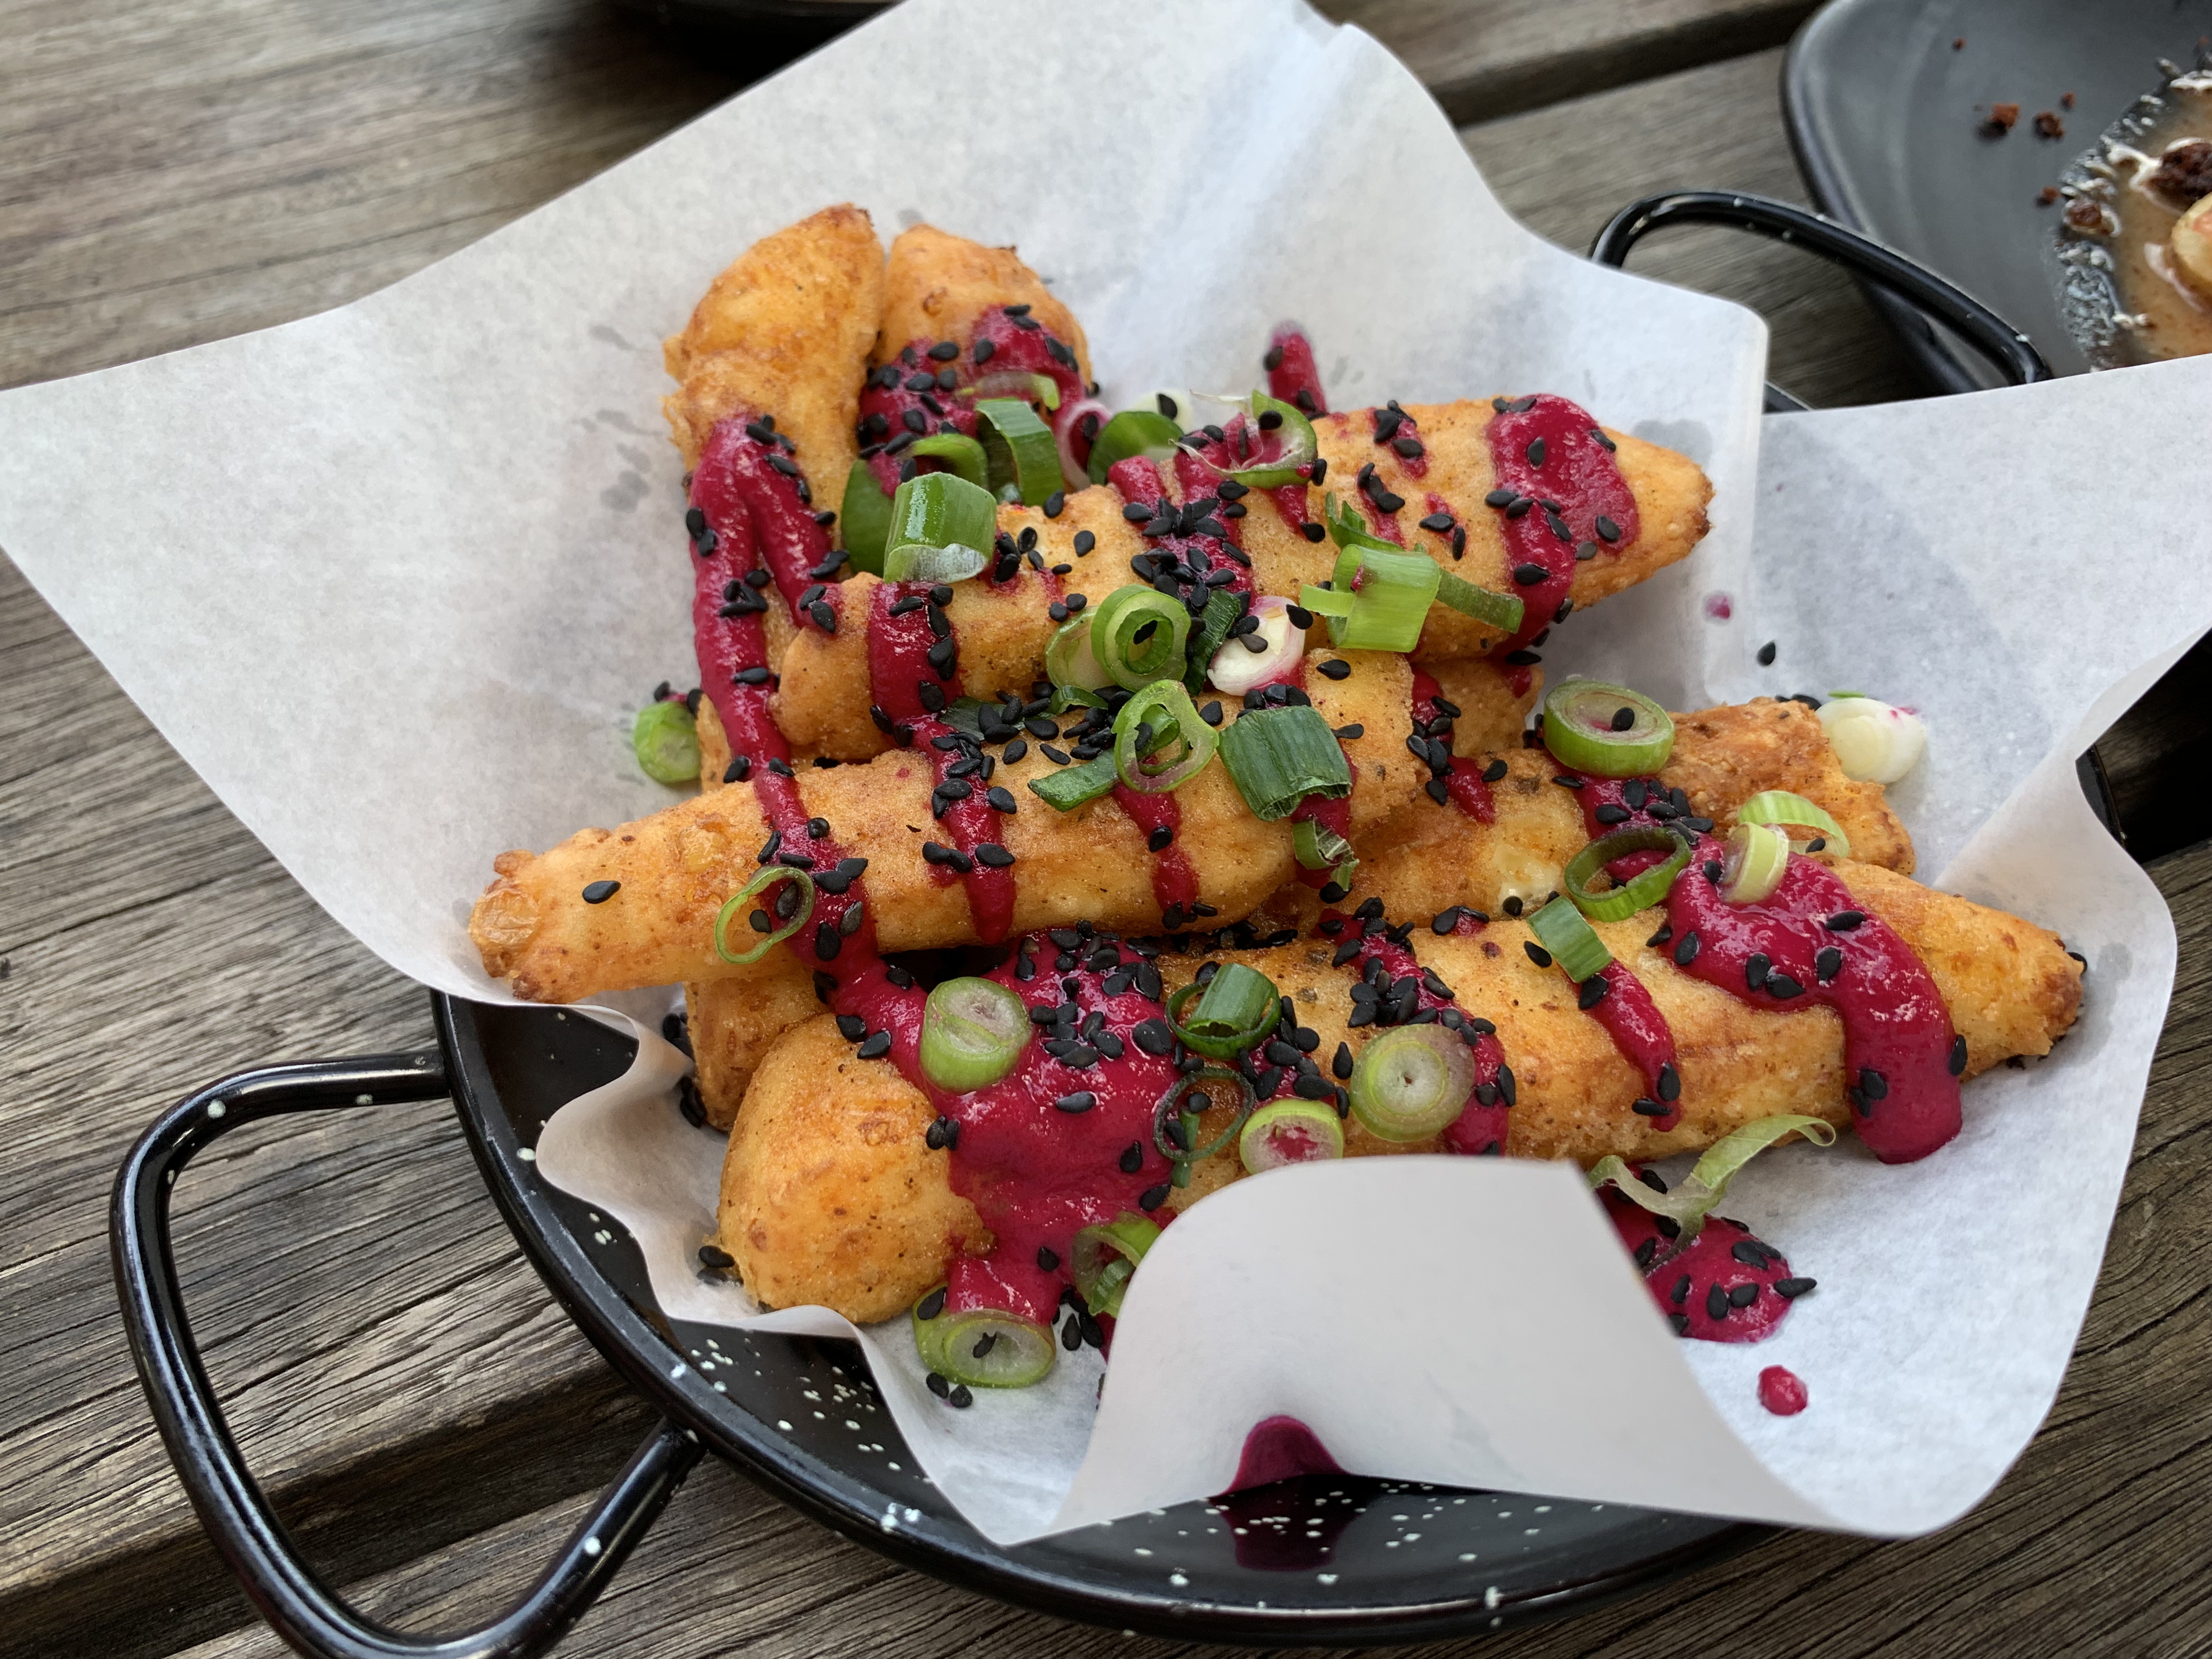 Haloumi Fries at The Boatbuilders Yard